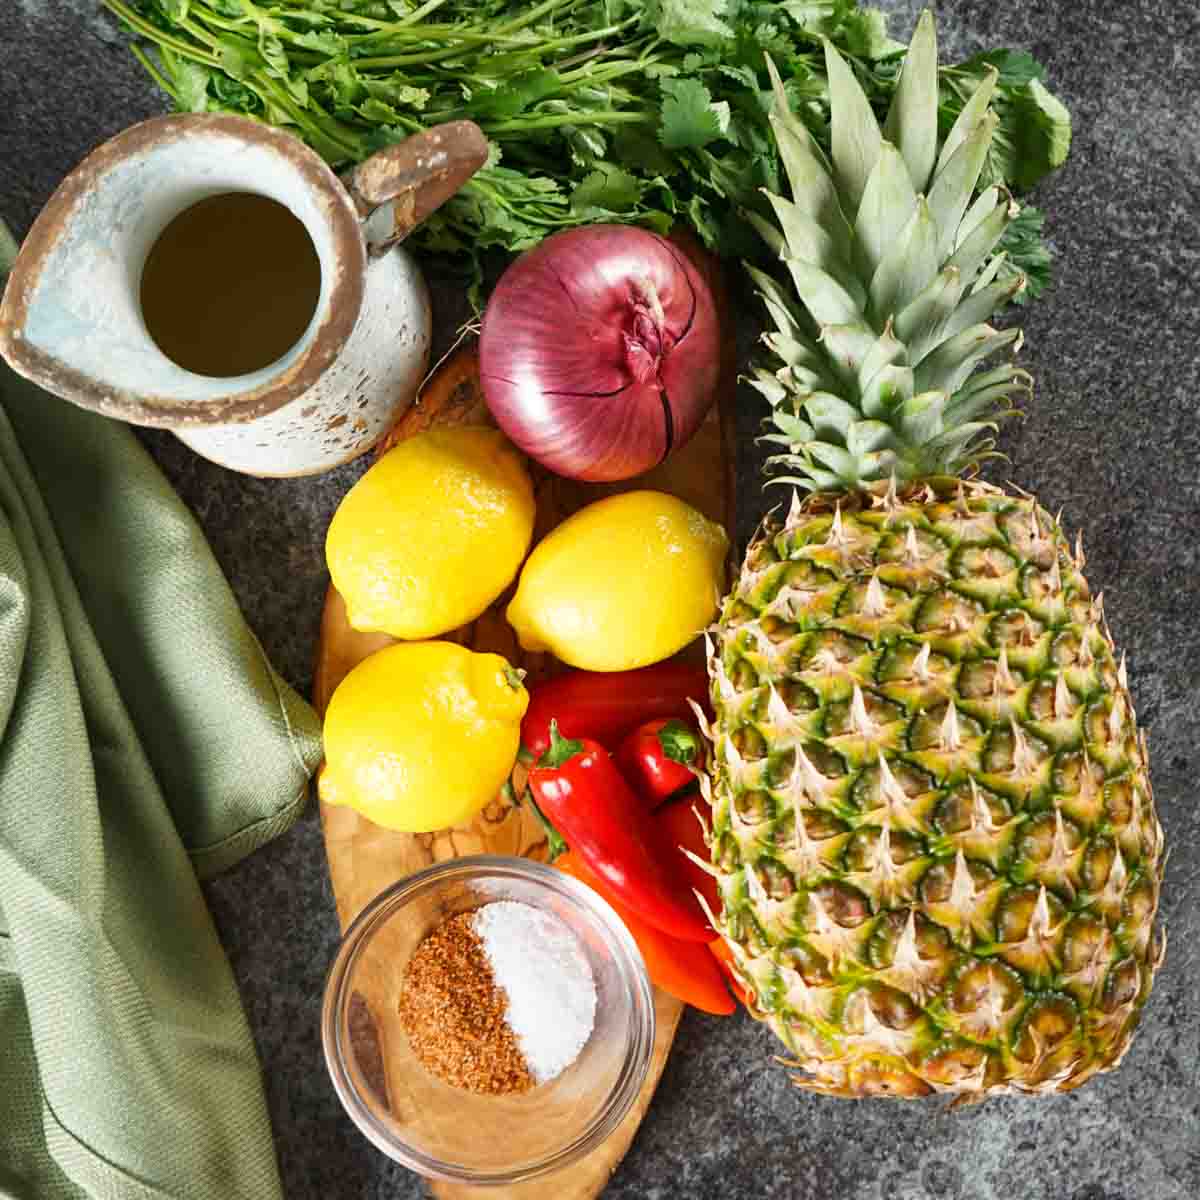 Assortment of fresh ingredients including pineapple, lemons, red peppers, onion, herbs, and seasonings on a gray countertop.